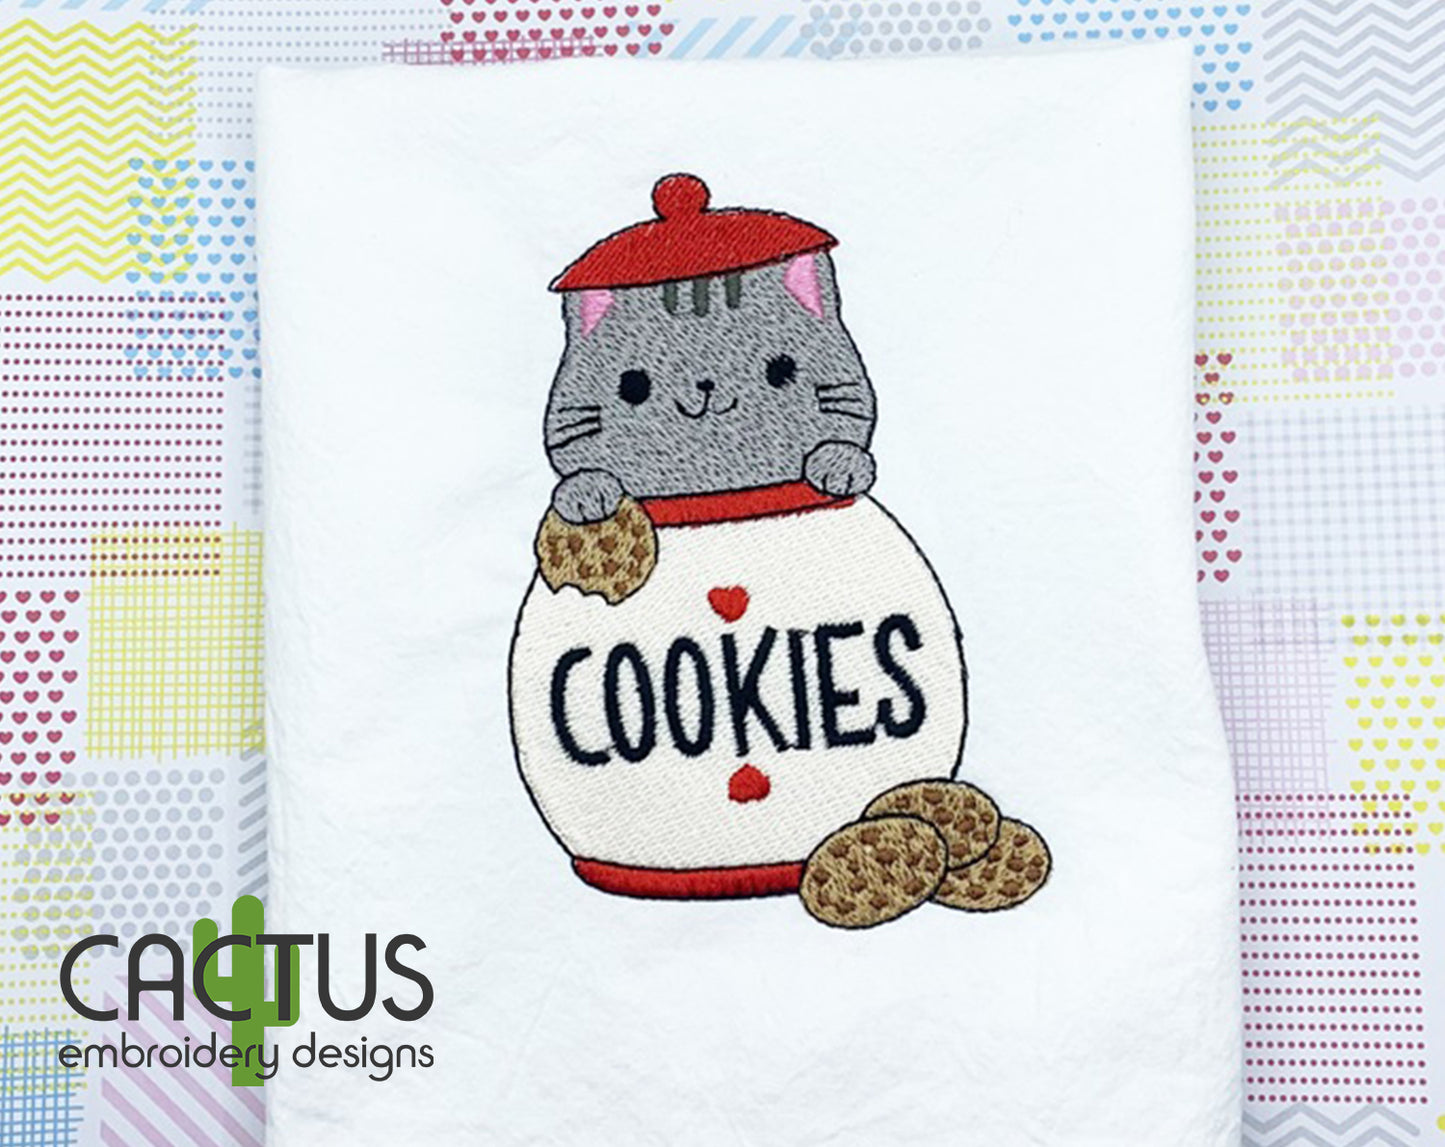 Cookies Embroidery Design